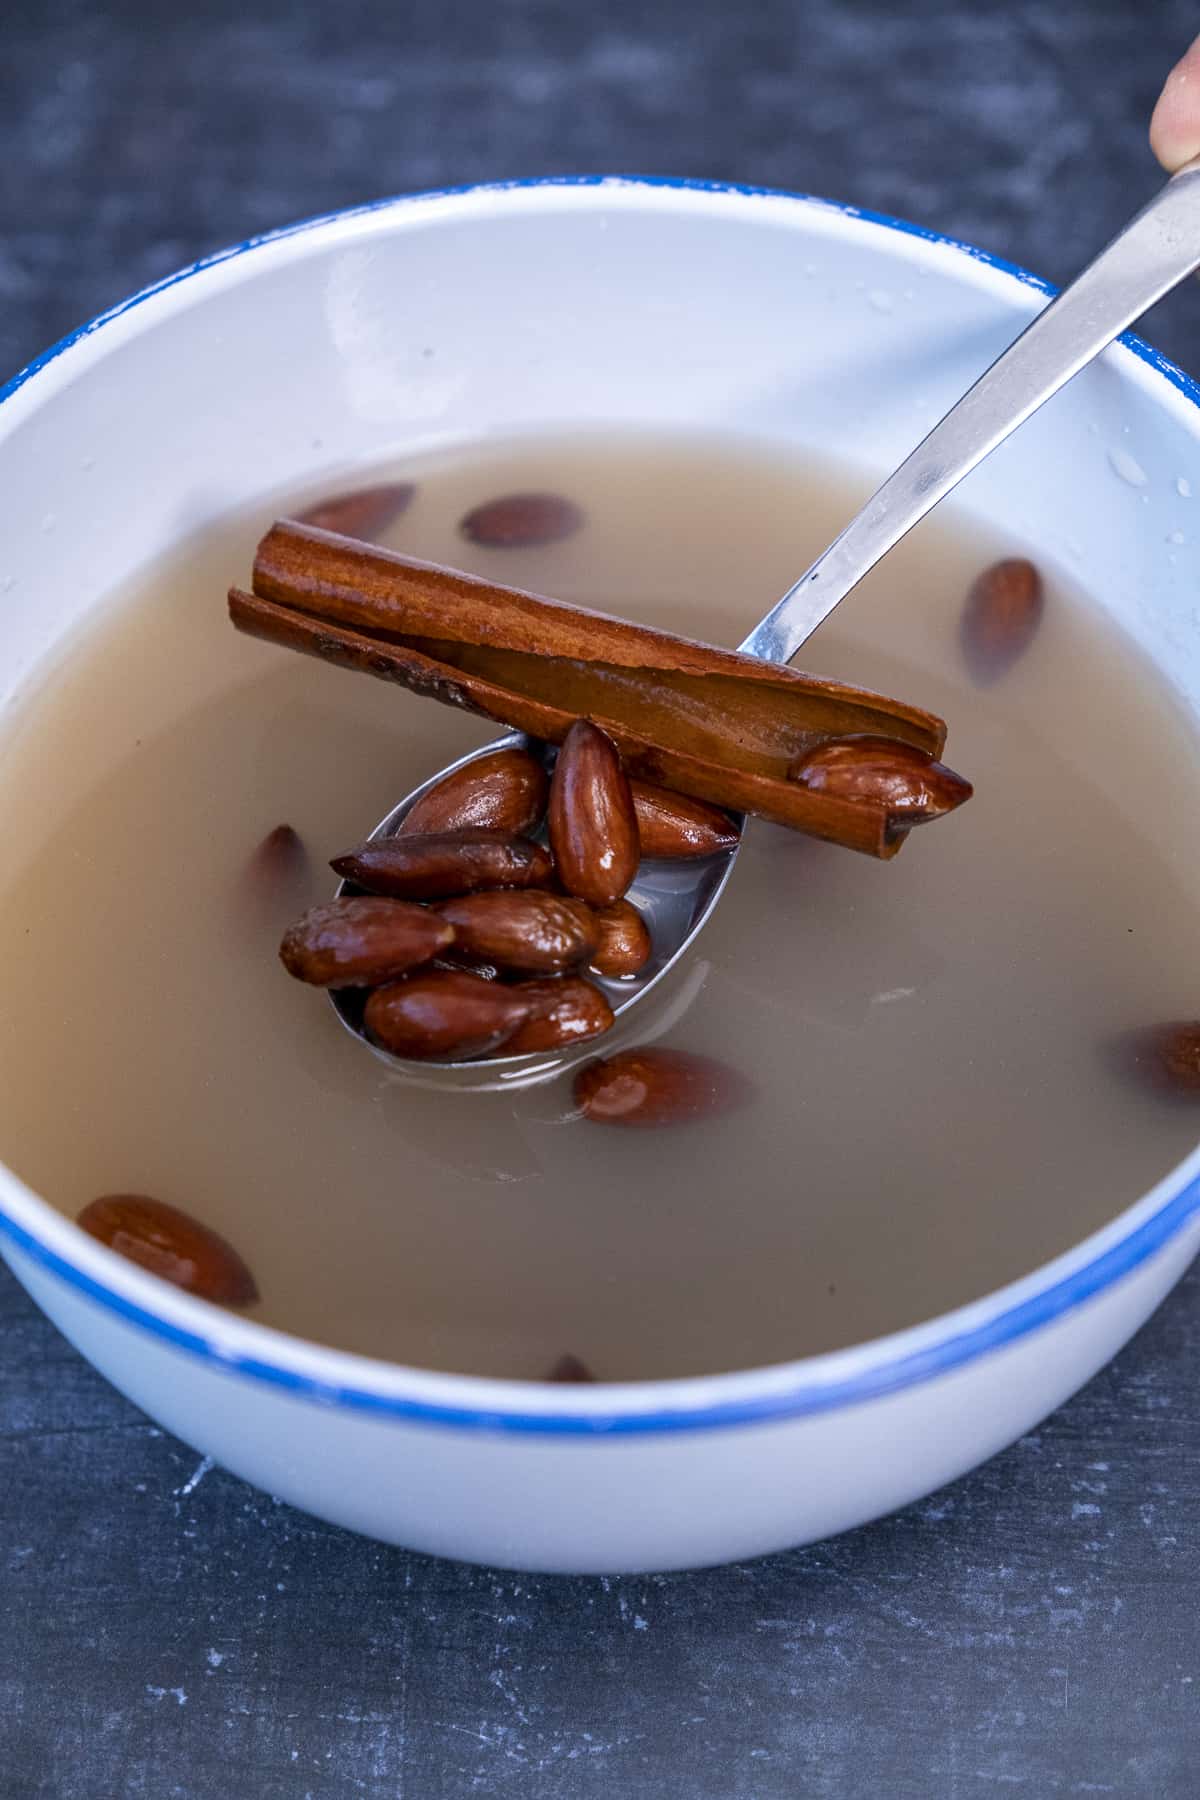 Roasted almonds and a cinnamon stick in a spoon over the soaking bowl.